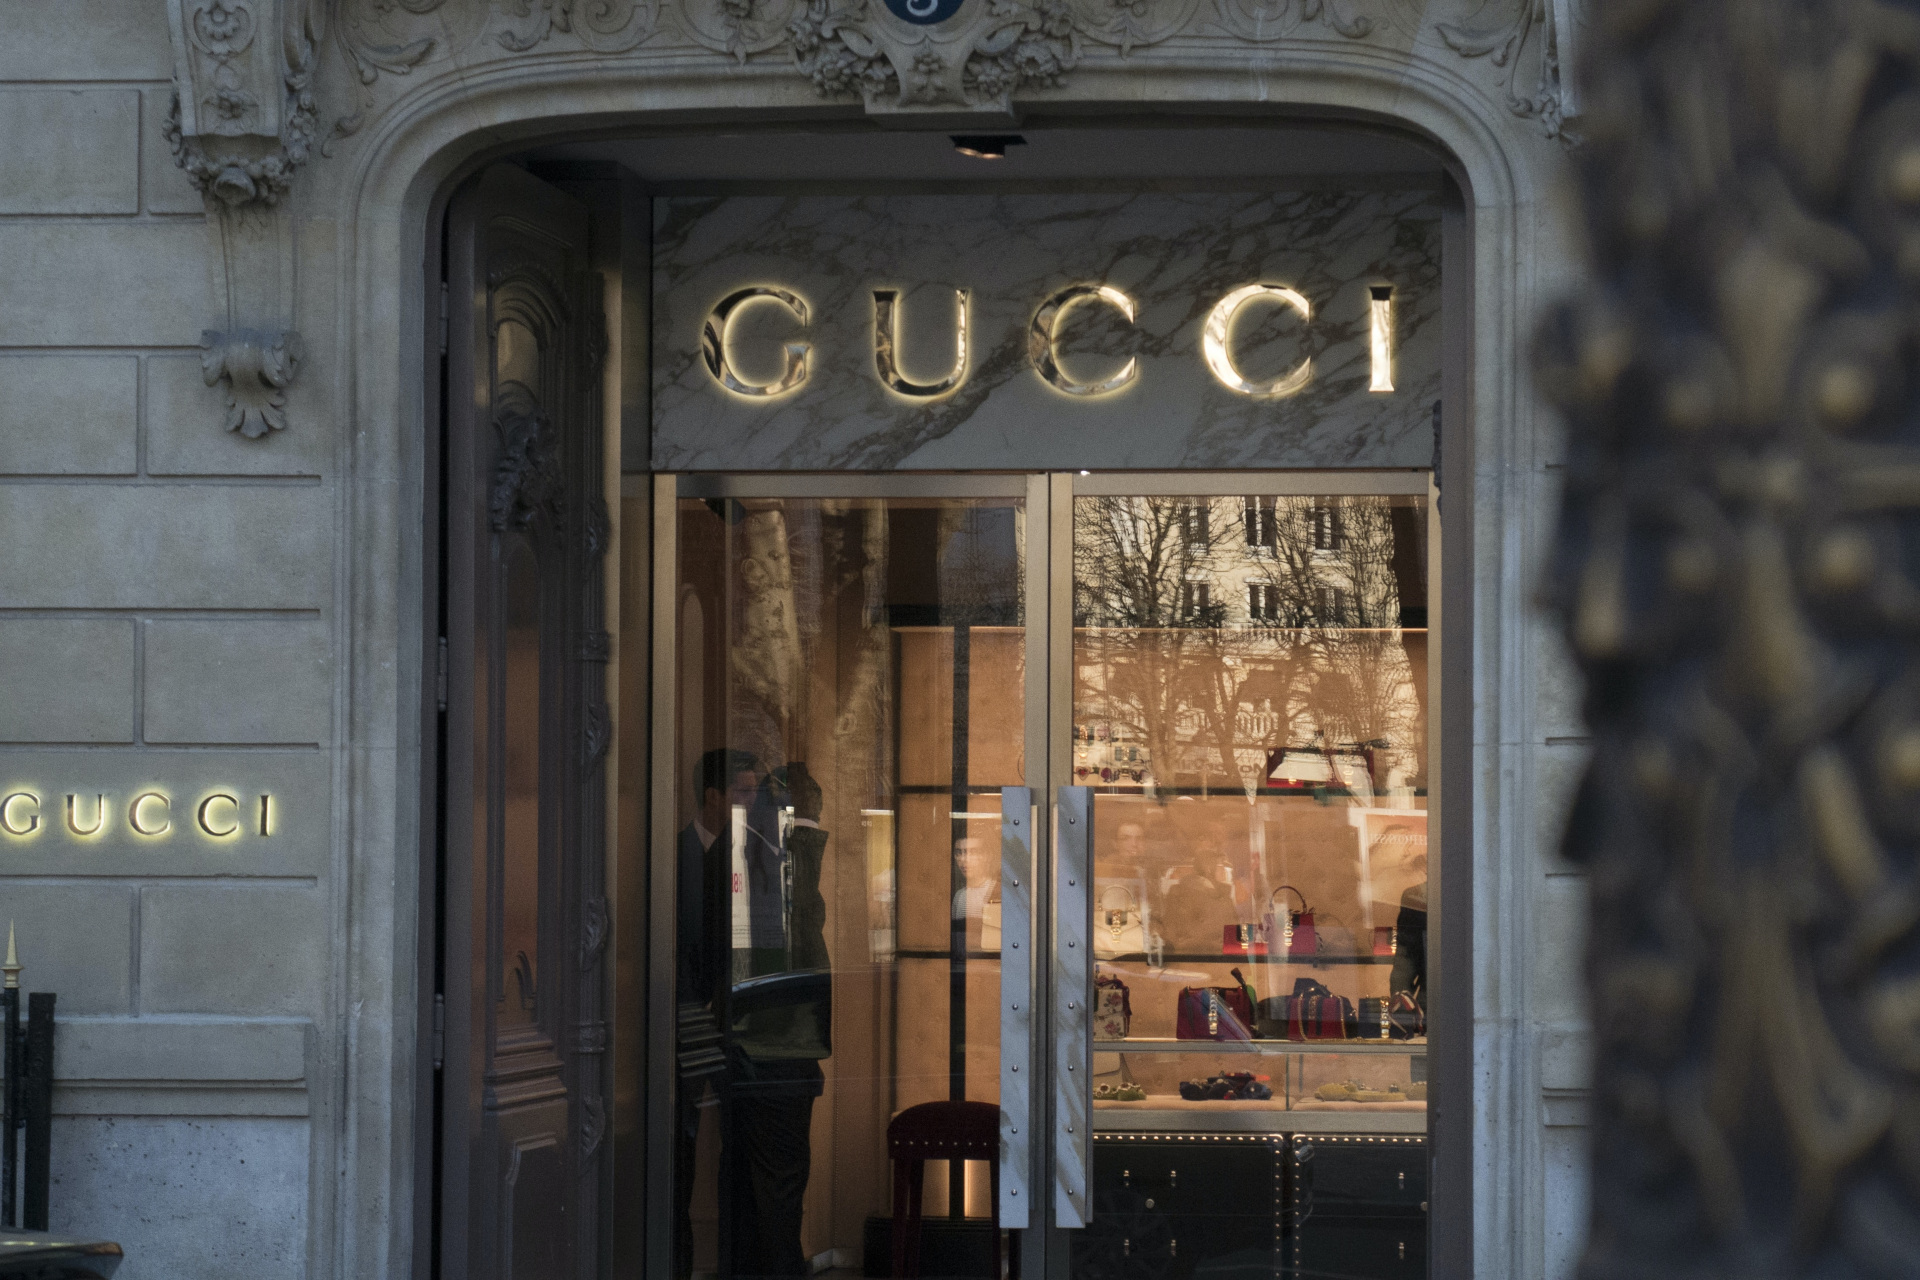 Gucci storefront